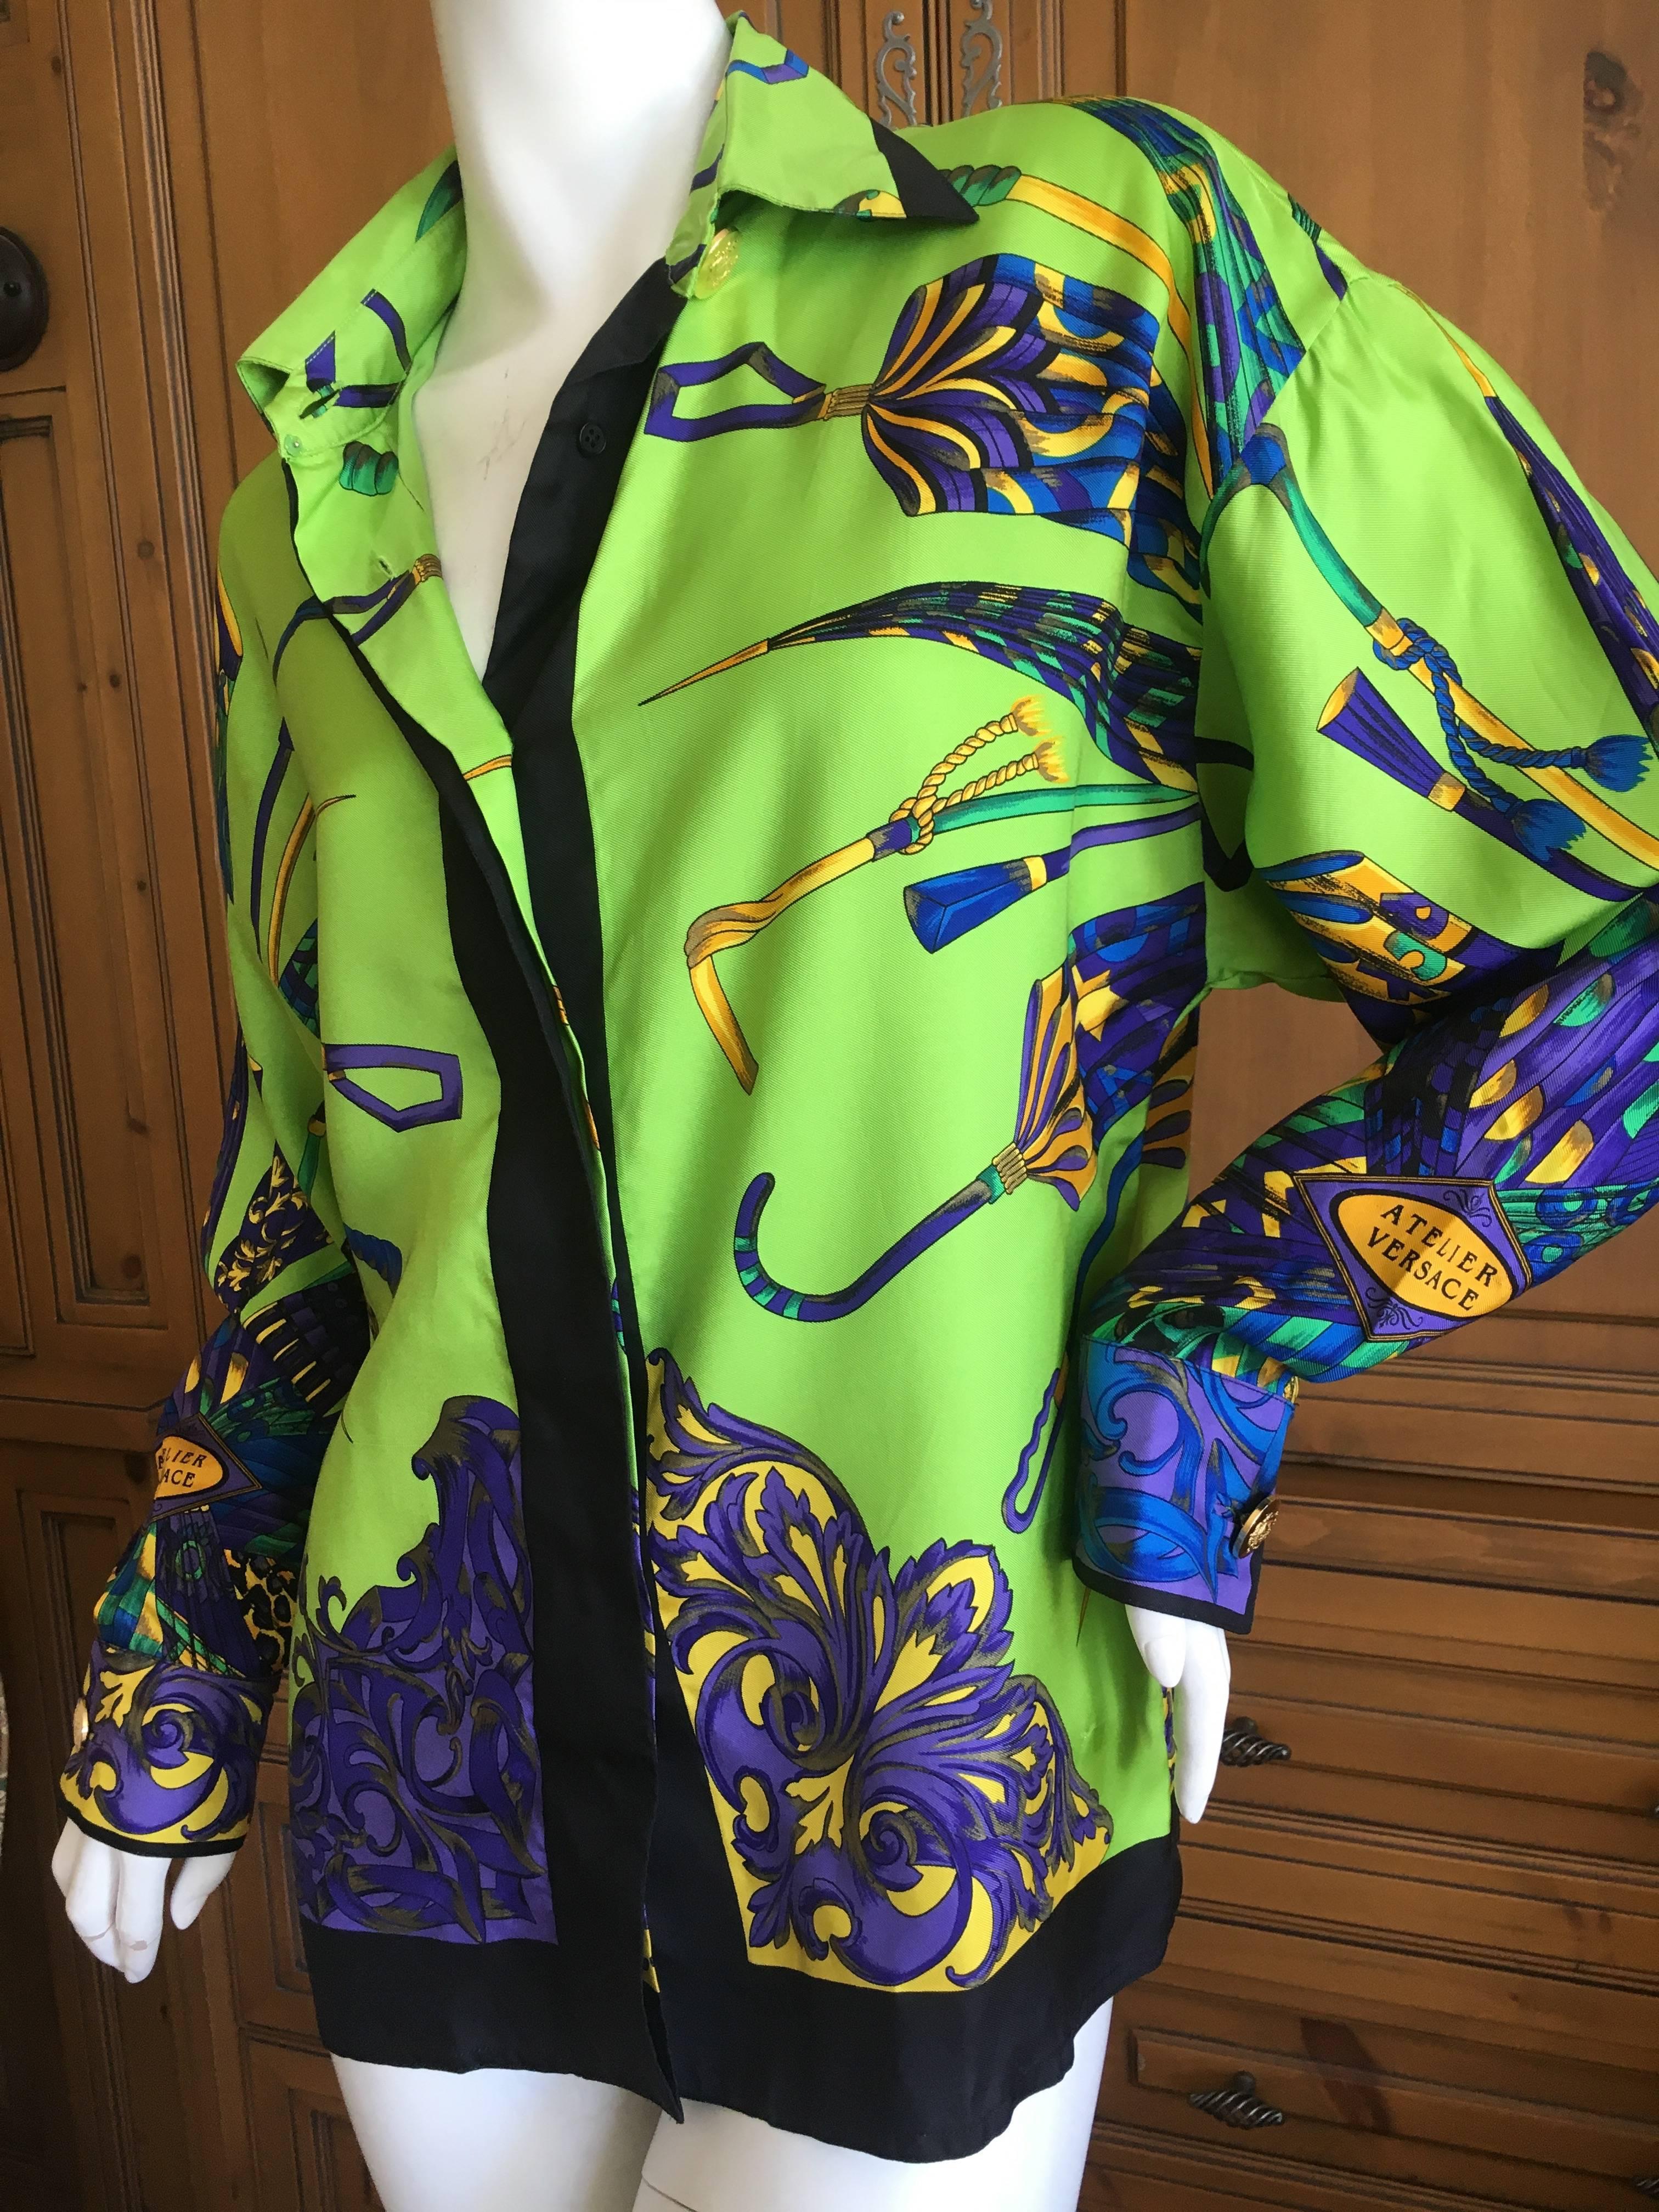 Gianni Versace Couture  Atelier Versace Silk Umbrella Print Blouse In Good Condition For Sale In Cloverdale, CA